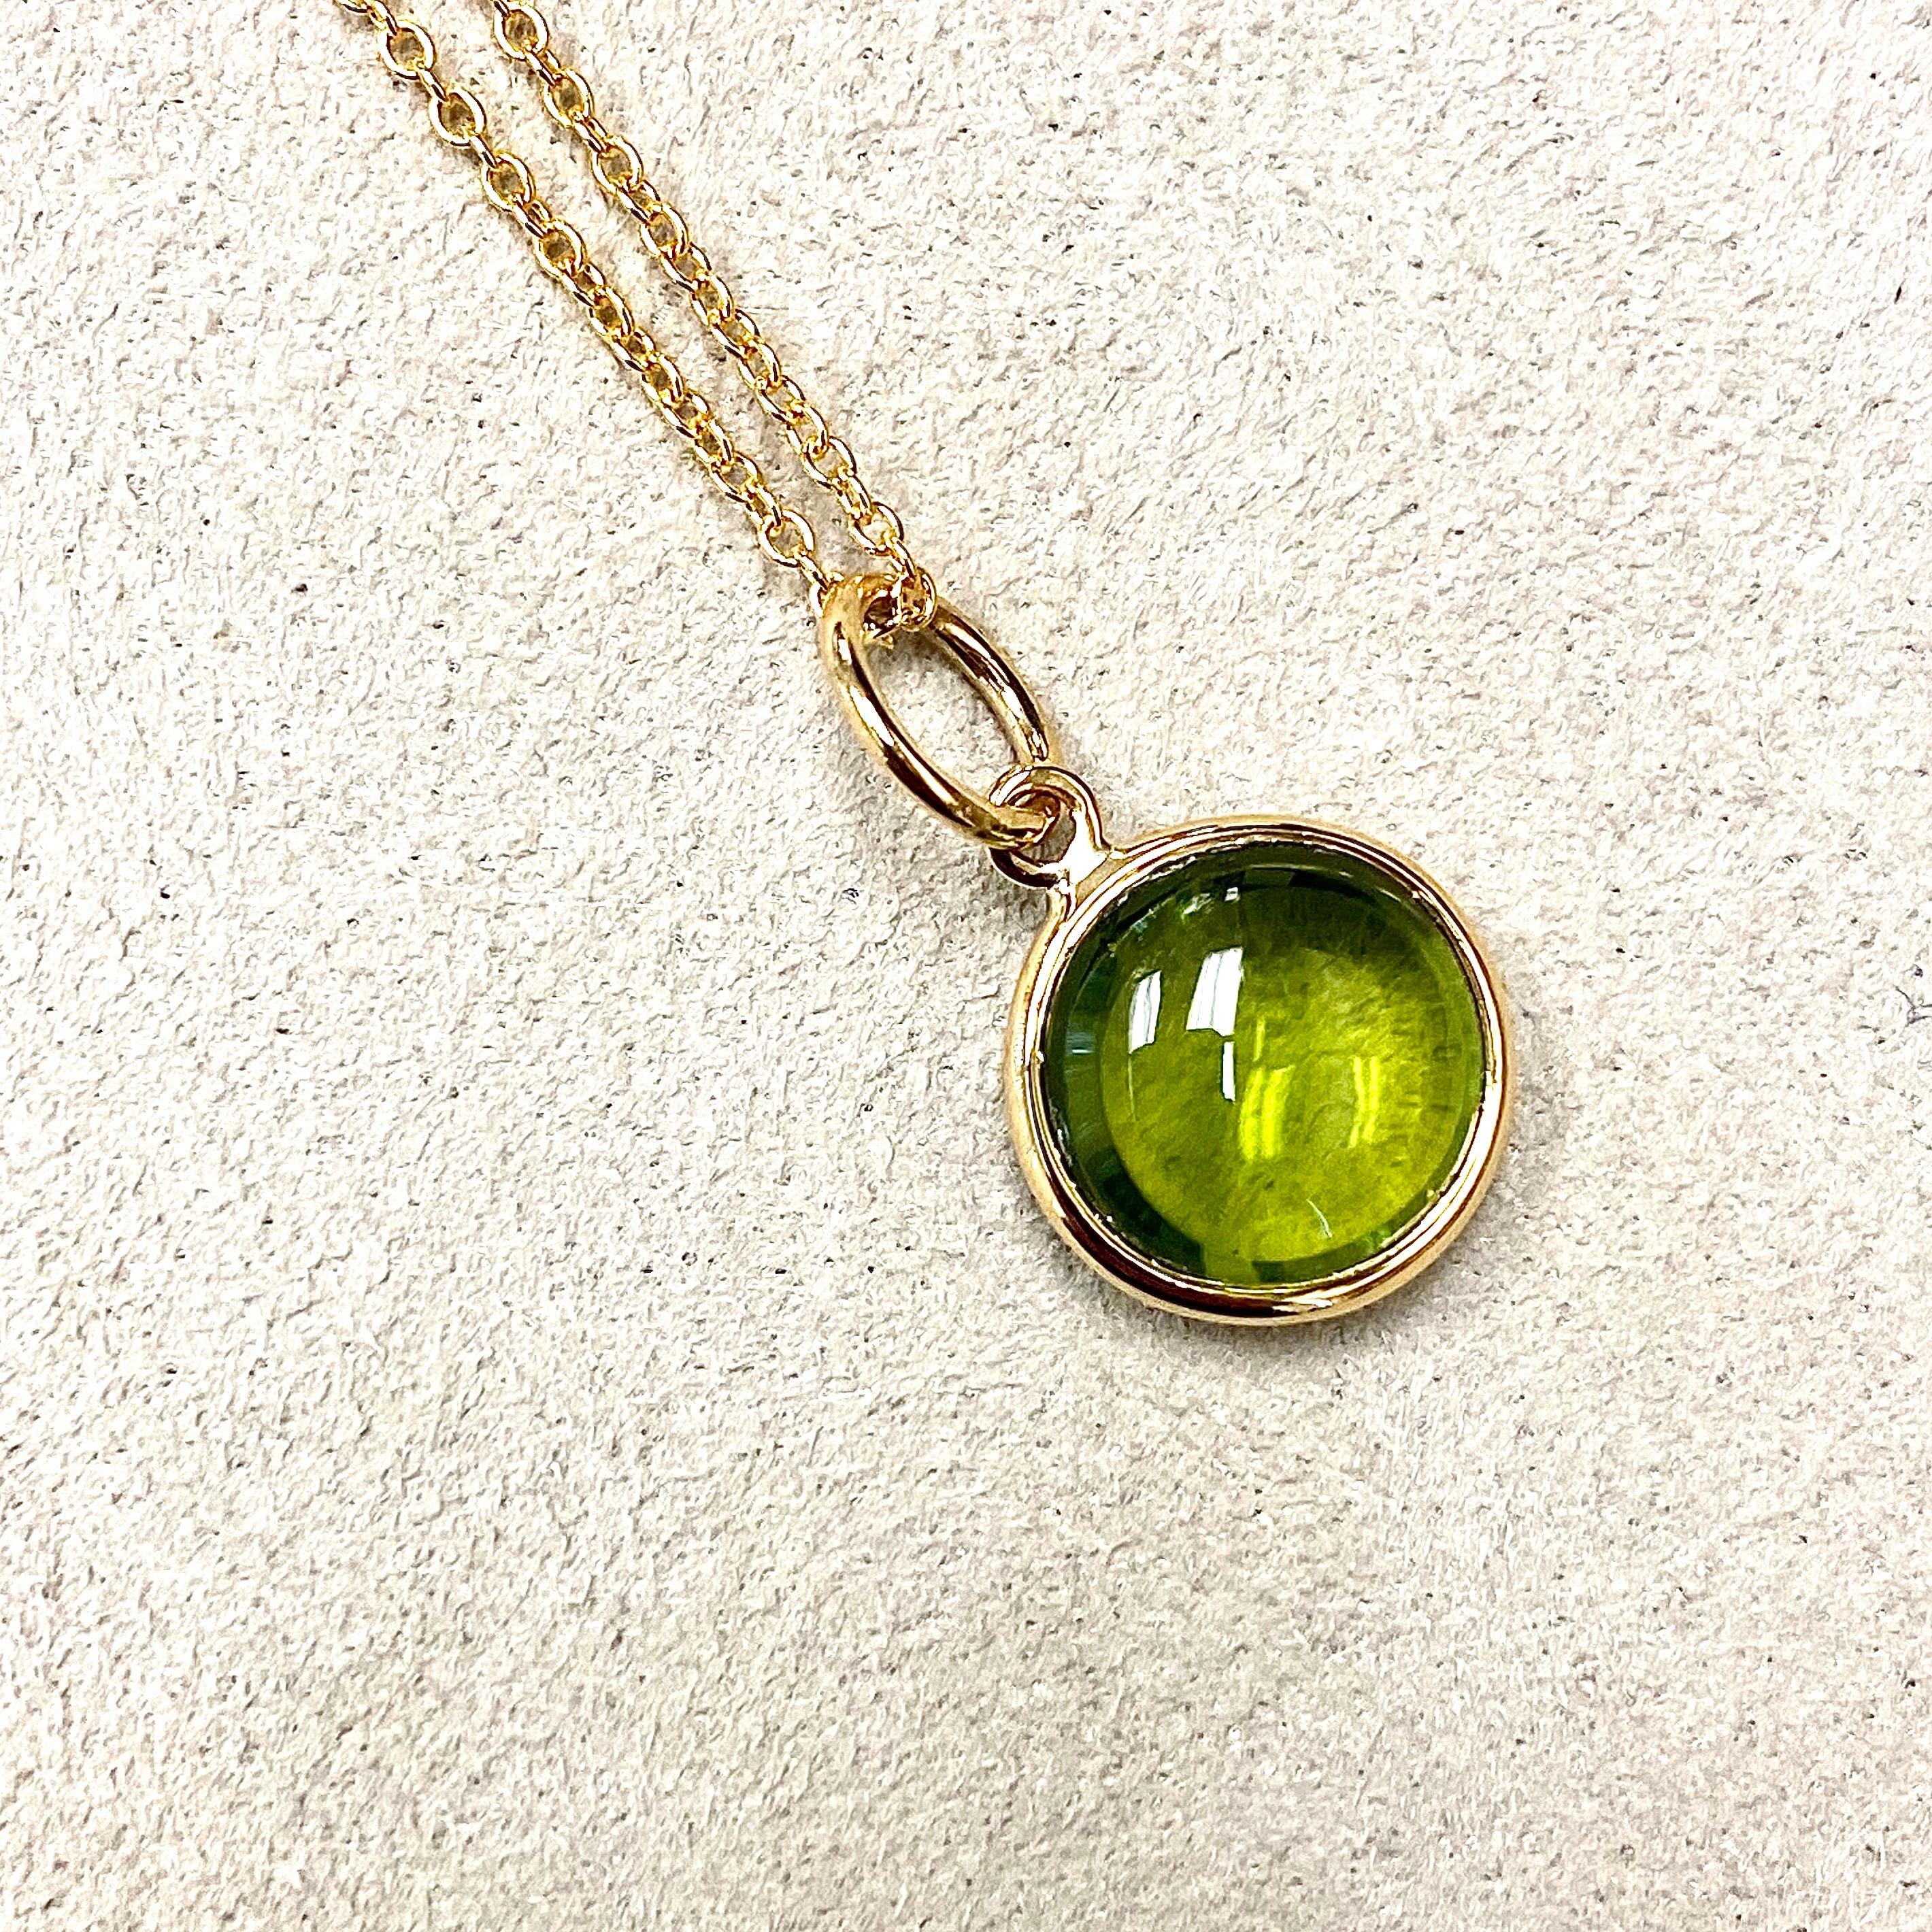 Created in 18 karat yellow gold
10 mm size charm
Peridot 3.5 cts approx
August Birthstone
Chain sold separately 

Crafted from 18 karat yellow gold and measuring 10mm in size, this decadent pendant is adorned with a beautiful aquamarine gemstone